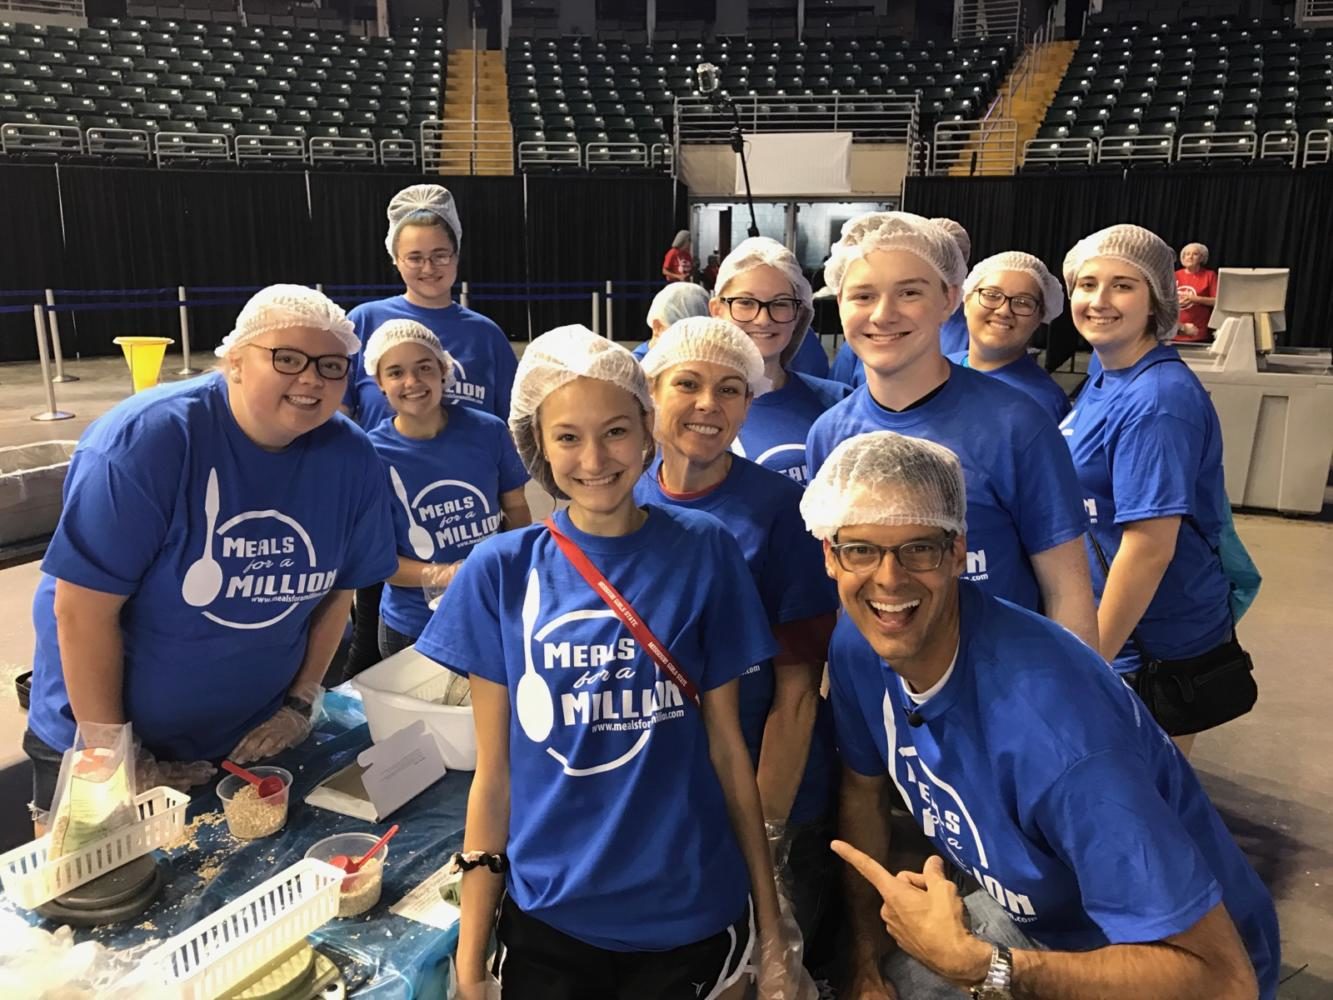 Key Club at Meals for a Million where Tim Ezell from Fox 2 News filmed Key Club hard at work.  Key Club will be on Fox 2 News The Thread on Saturday, Sept. 16 at 8:30 a.m.